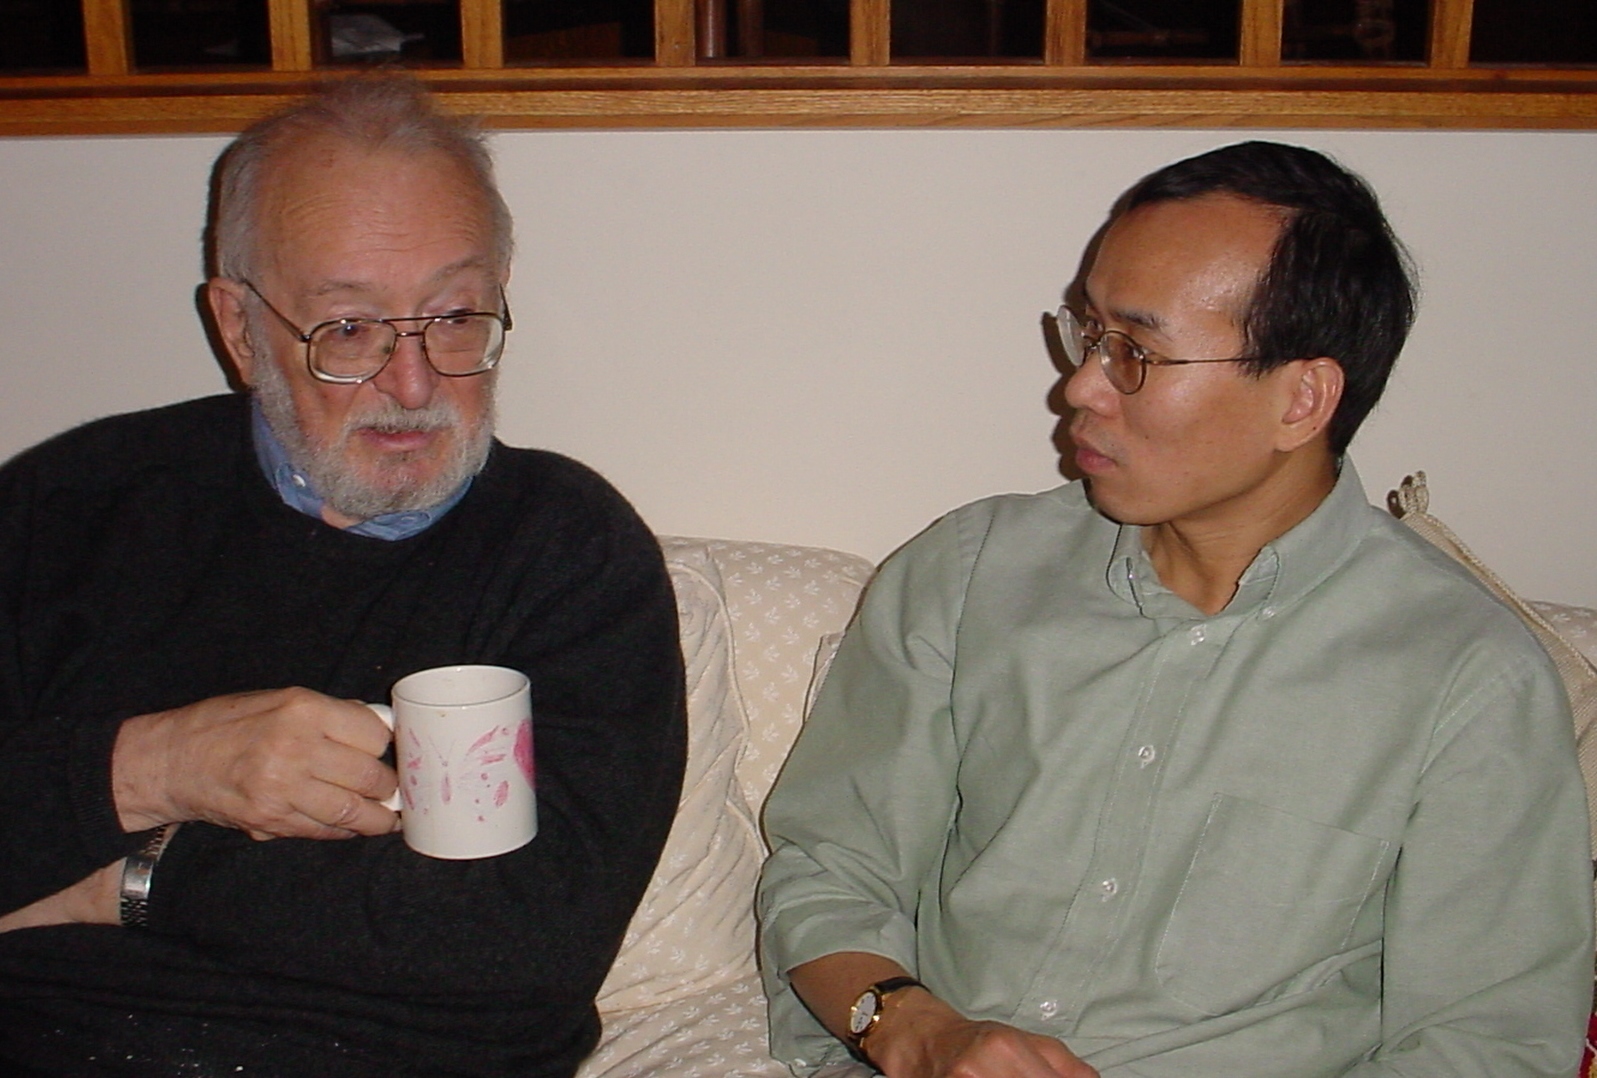 A candid photo of Zhi-Pei Liang and Paul Lauturbur sitting on a couch and talking; Lauturbur is holding a mug.